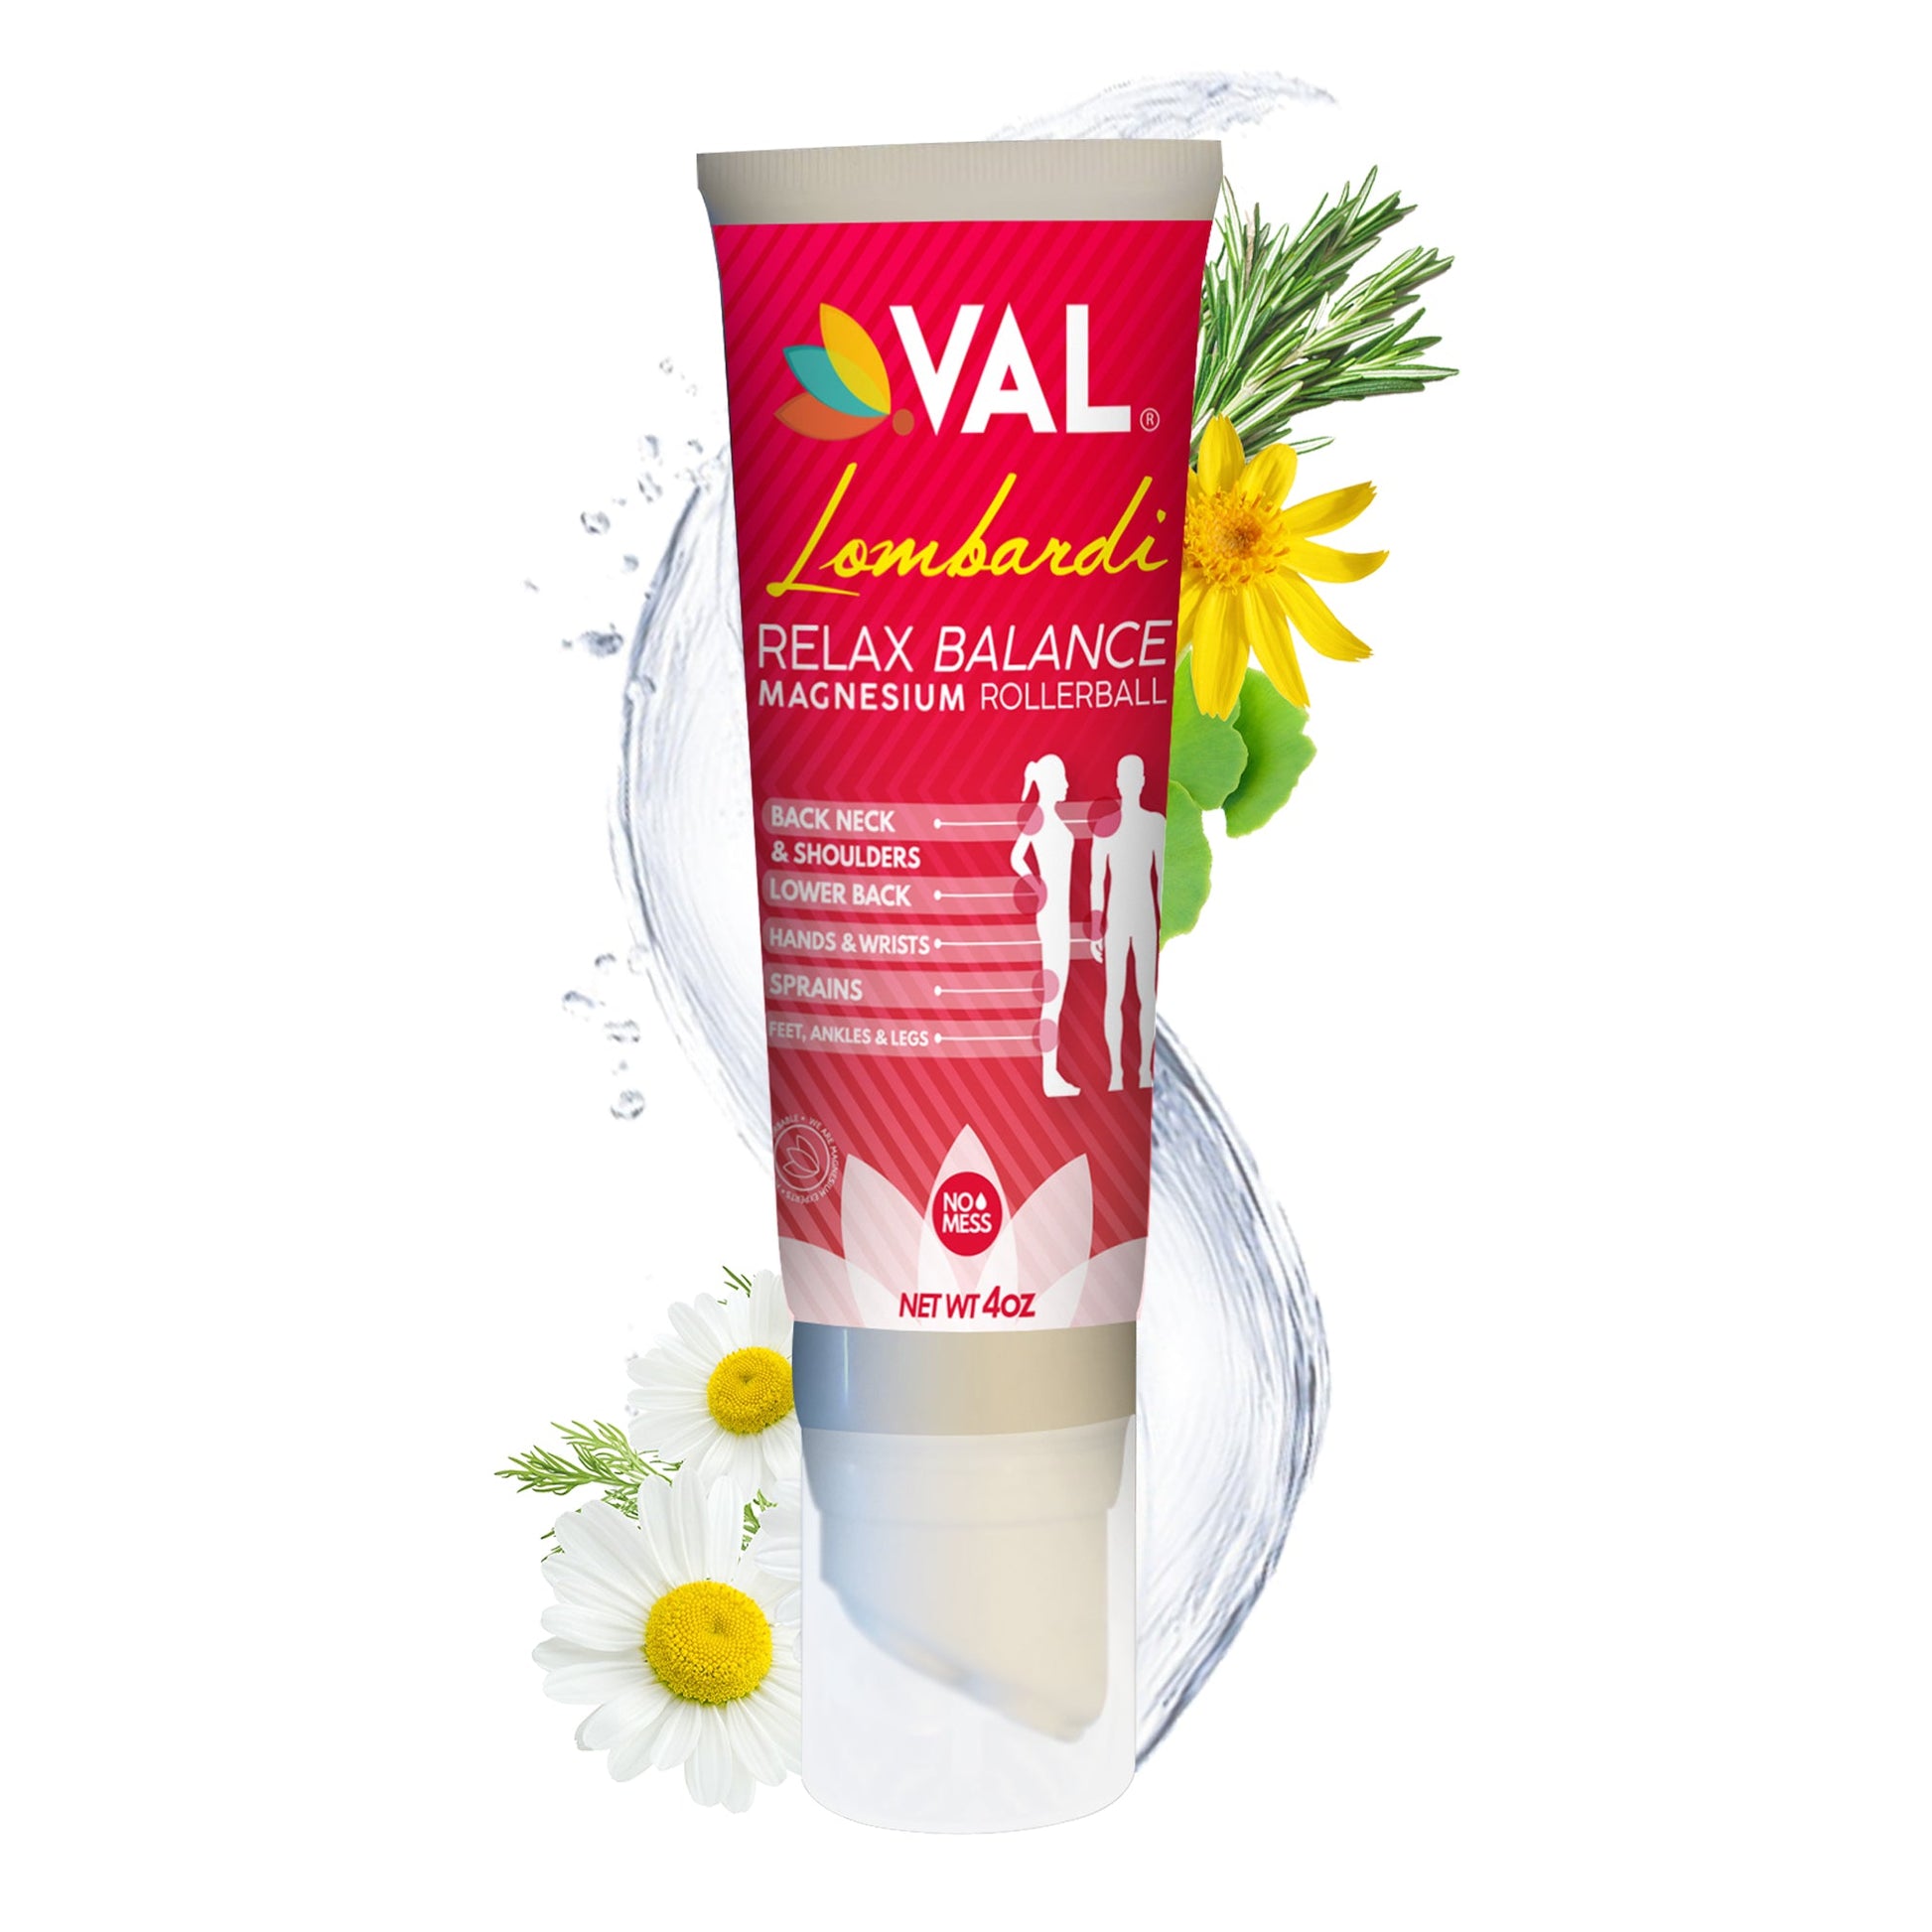 VAL Lombardi Magnesium Rollerball - Deep Pressure Massage Applicator with Cool-to-The-Touch Stainless Steel Rollerballs - 4oz - Val Supplements